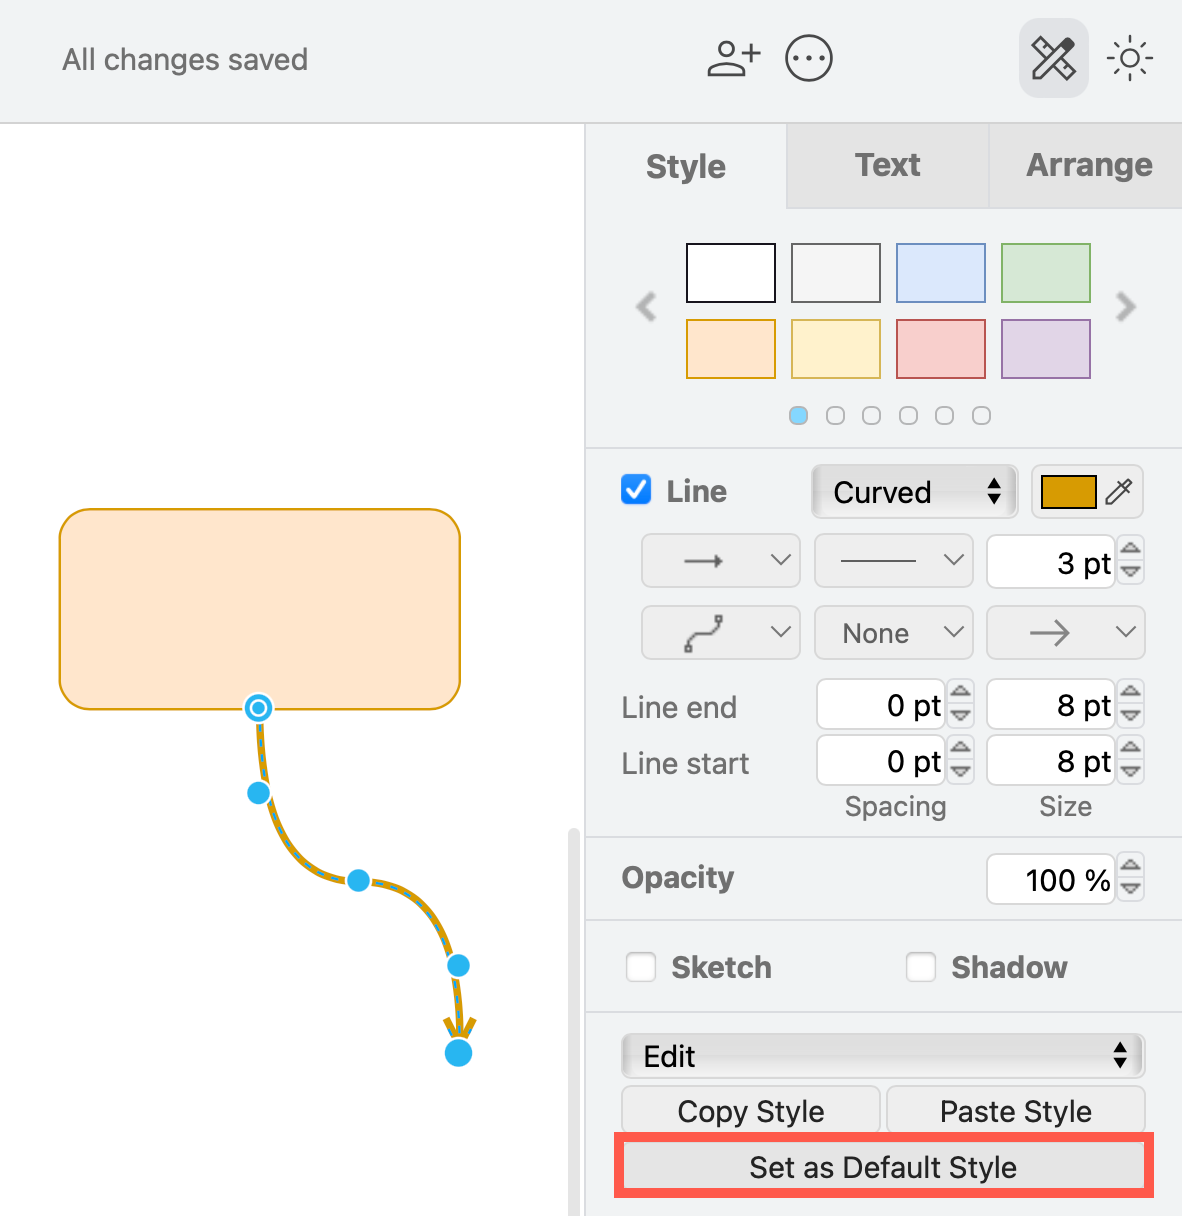 Style a shape and a connector when you start you diagram, set it as the default in the Style tab of the format panel in draw.io